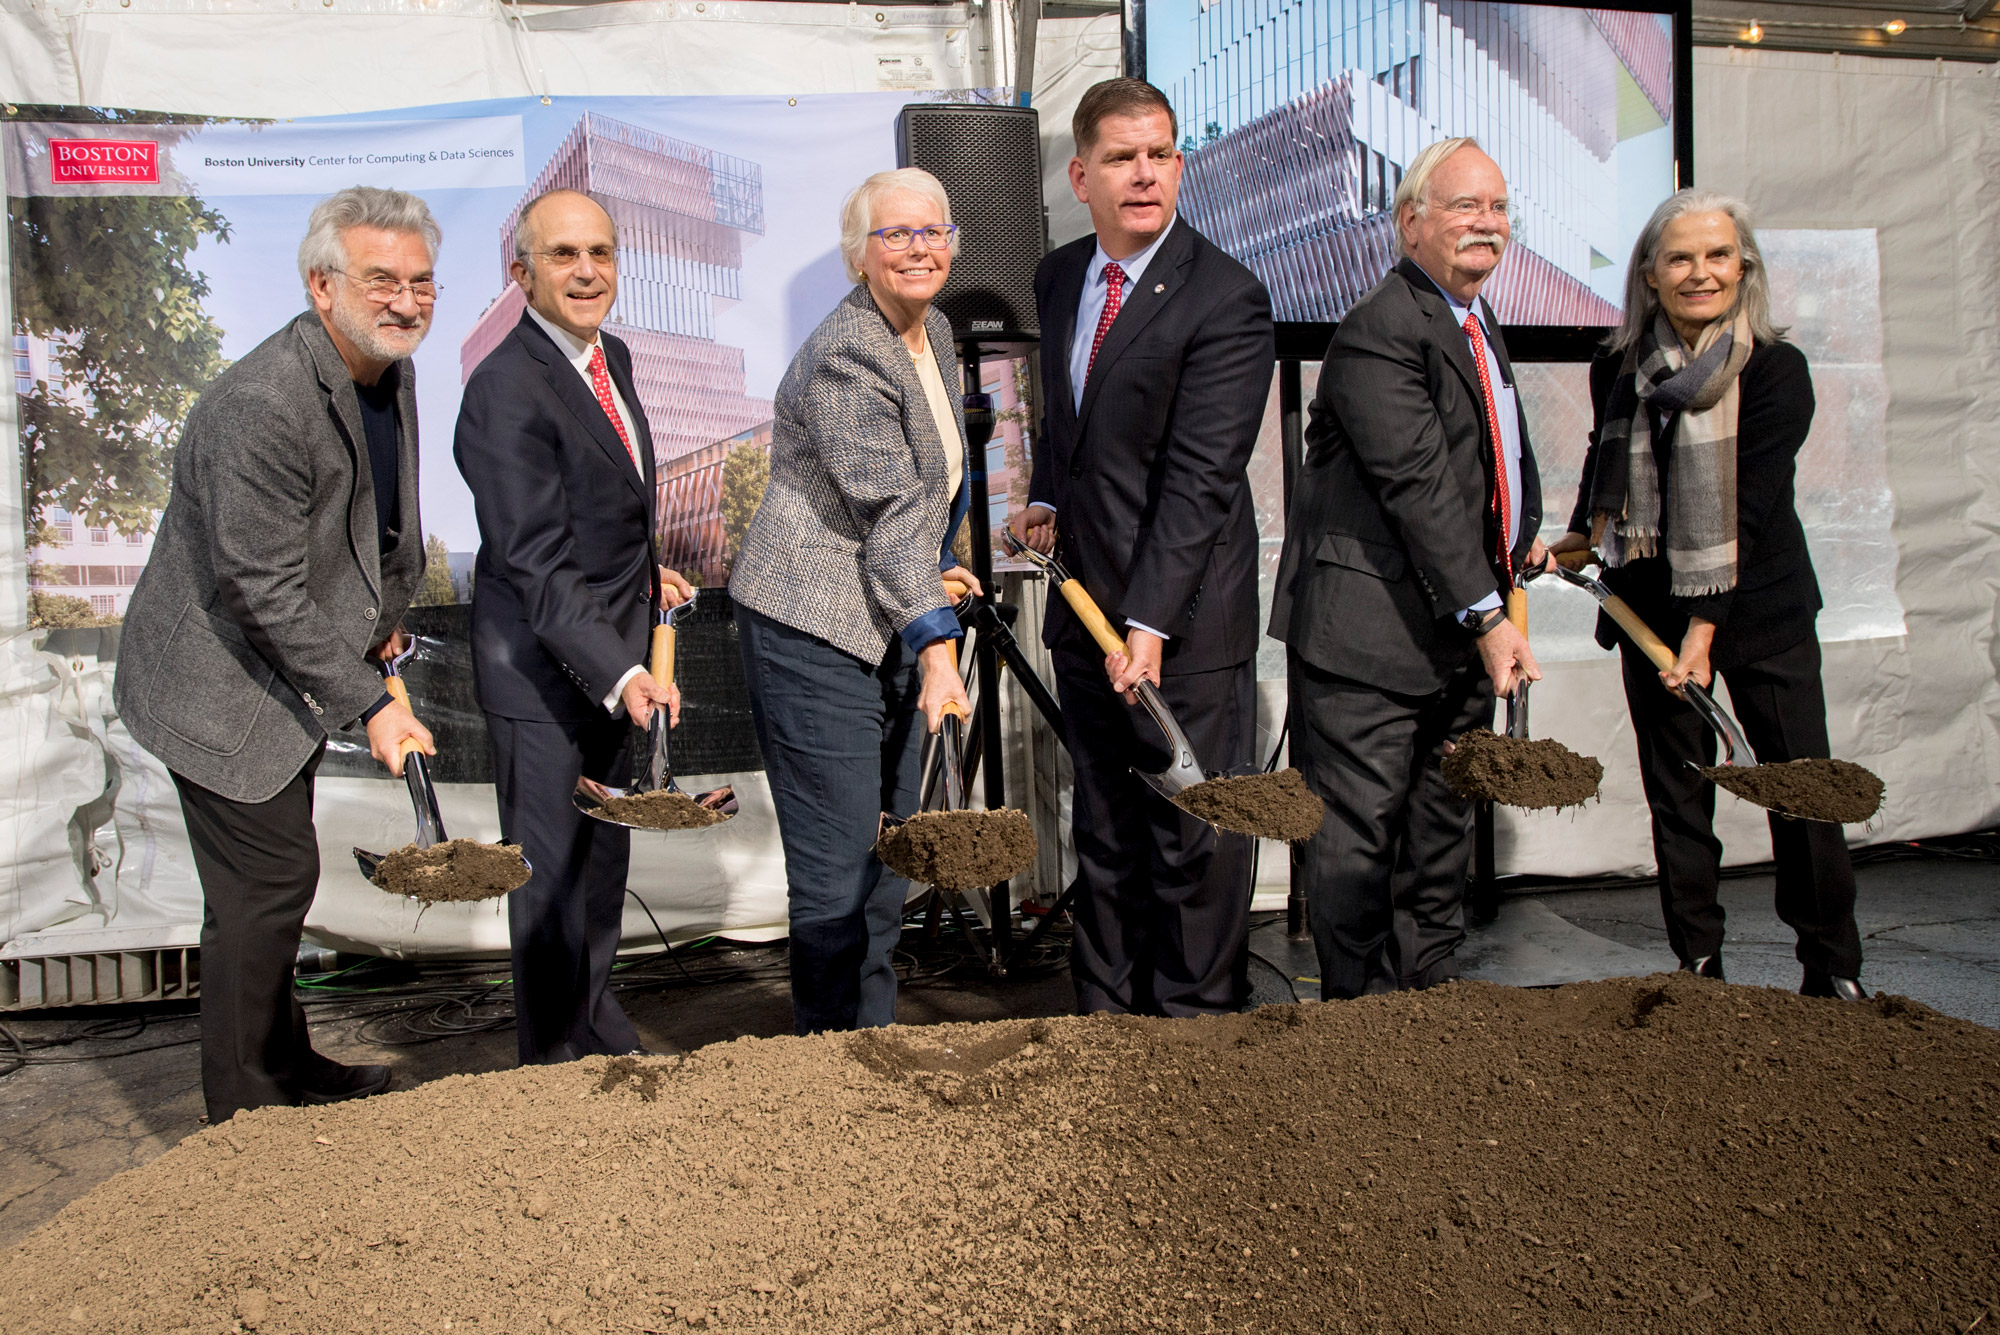 People hold shovels with dirt to celebrate the groundbreaking of the new Computing & Data Sciences Center